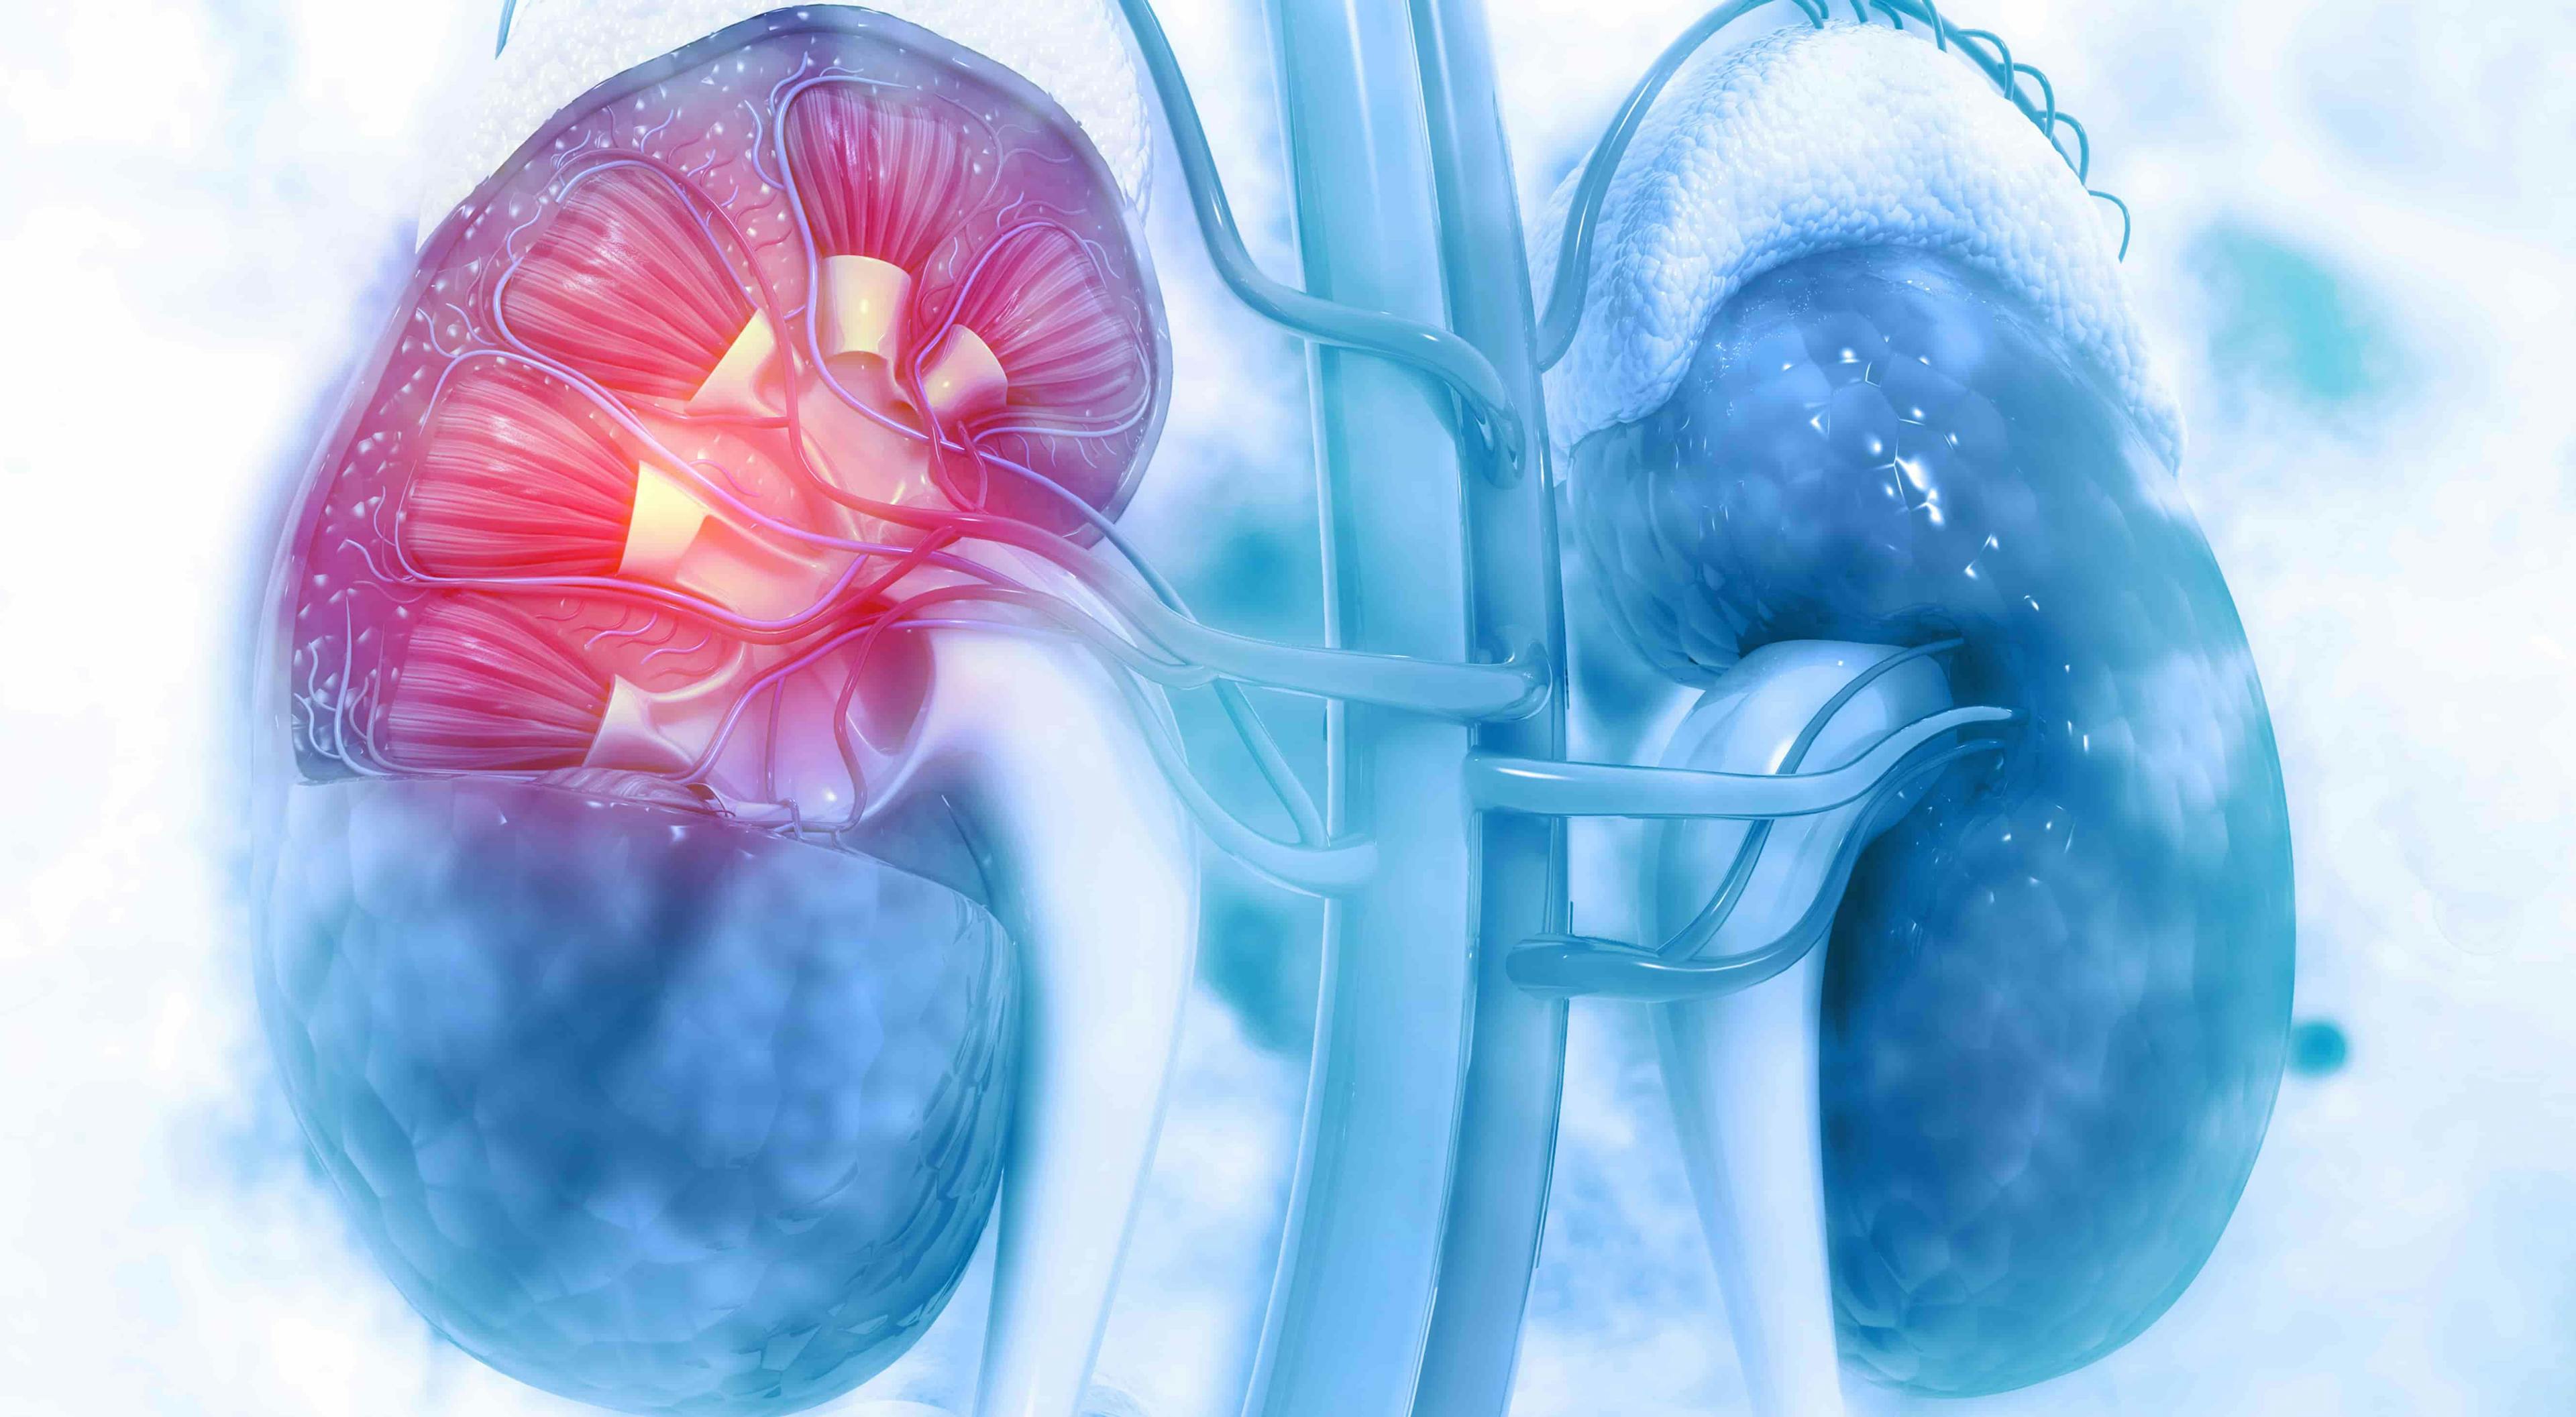 Lenvatinib/Pembrolizumab Boosts Outcomes For Next Line Therapy in Advanced Renal Cell Carcinoma